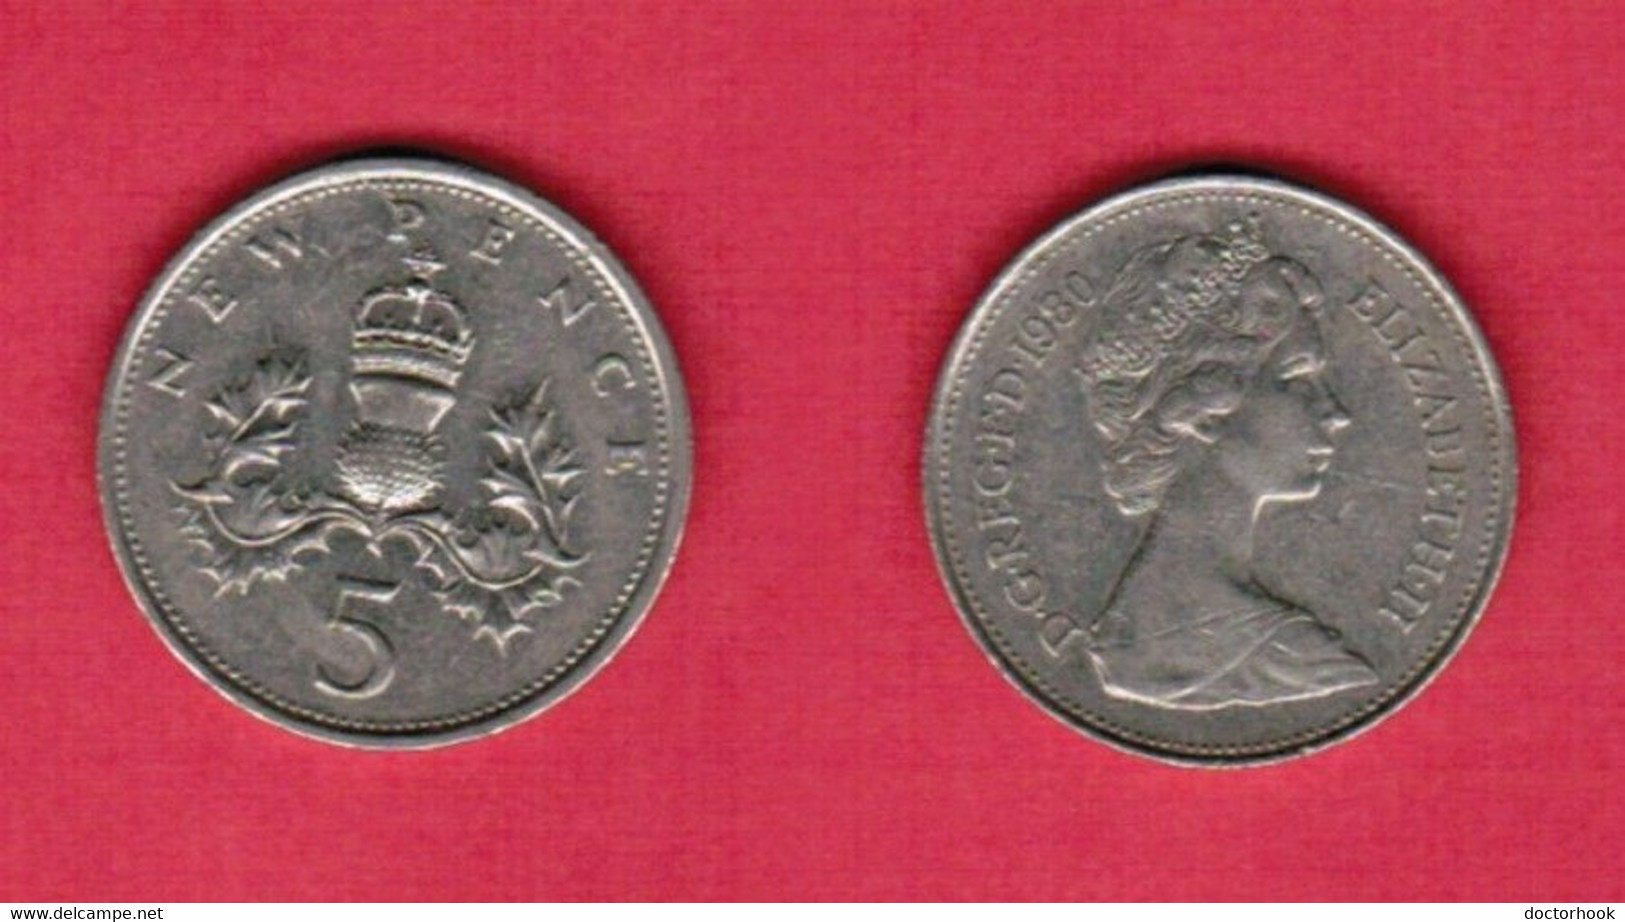 GREAT BRITAIN   5 NEW PENCE 1980 (KM # 911) #6606 - 5 Pence & 5 New Pence